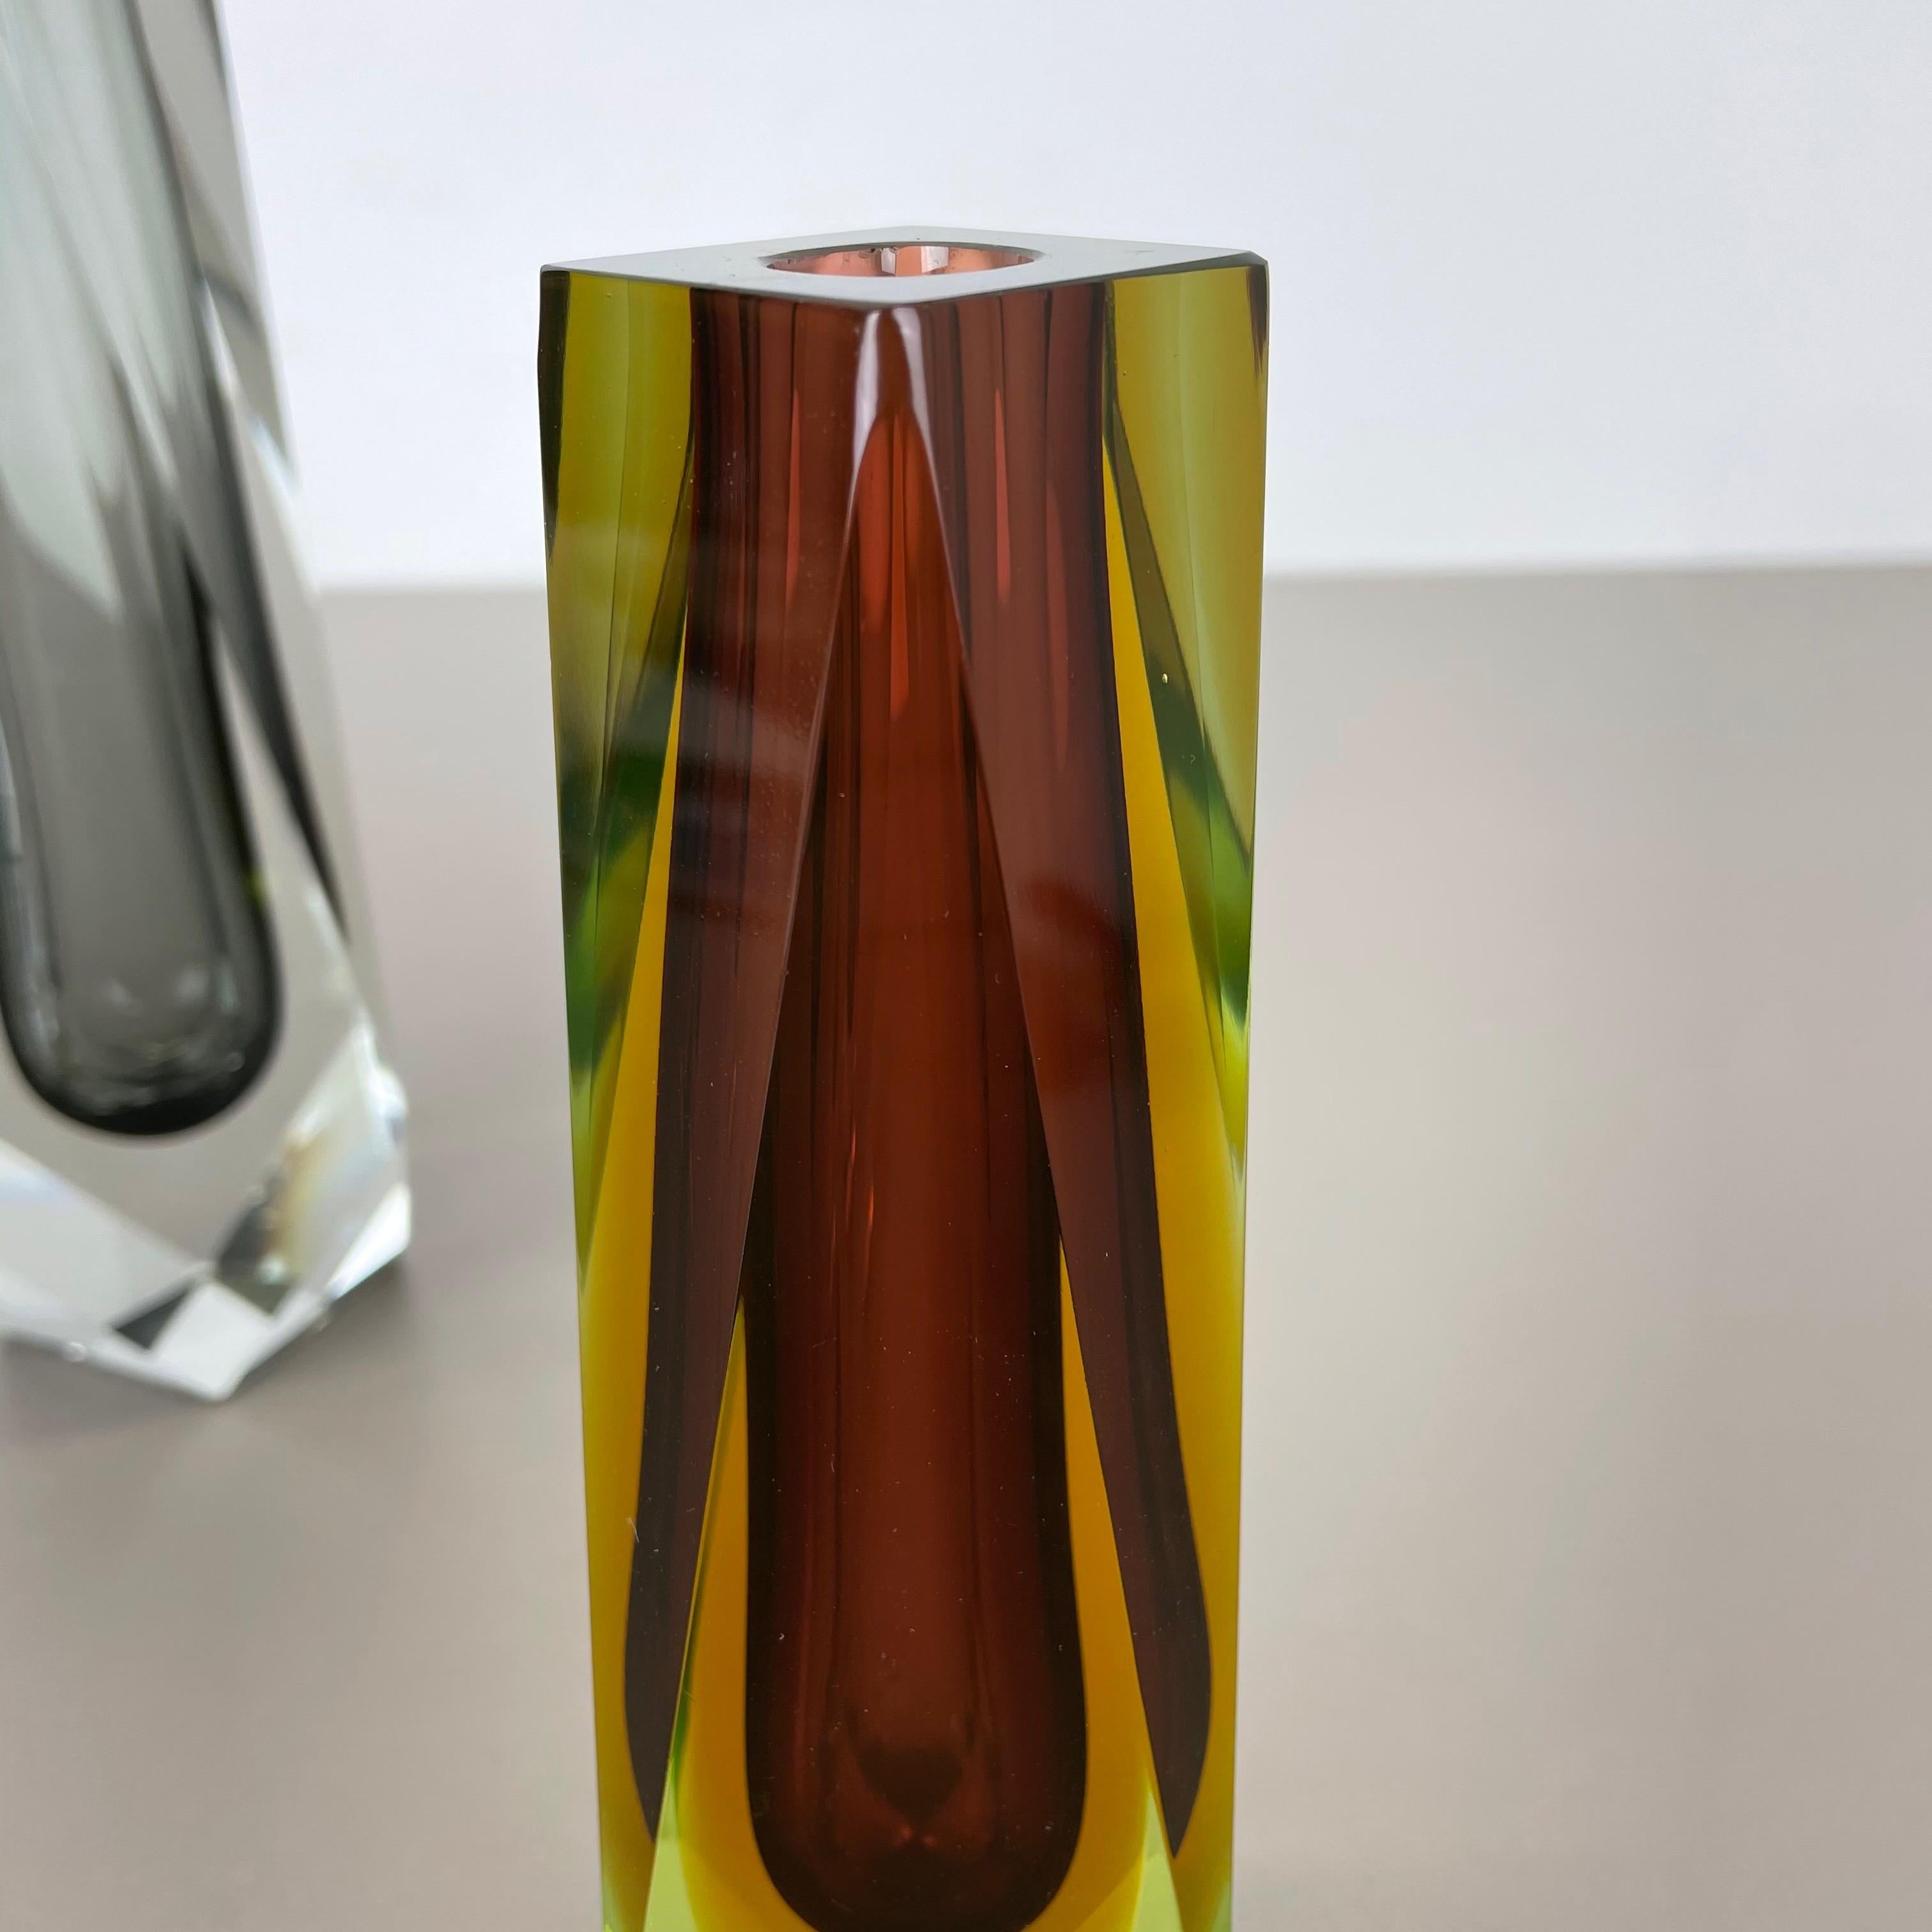 Rare Set of 2 Faceted Murano Glass Sommerso Vases, Italy, 1970s For Sale 8